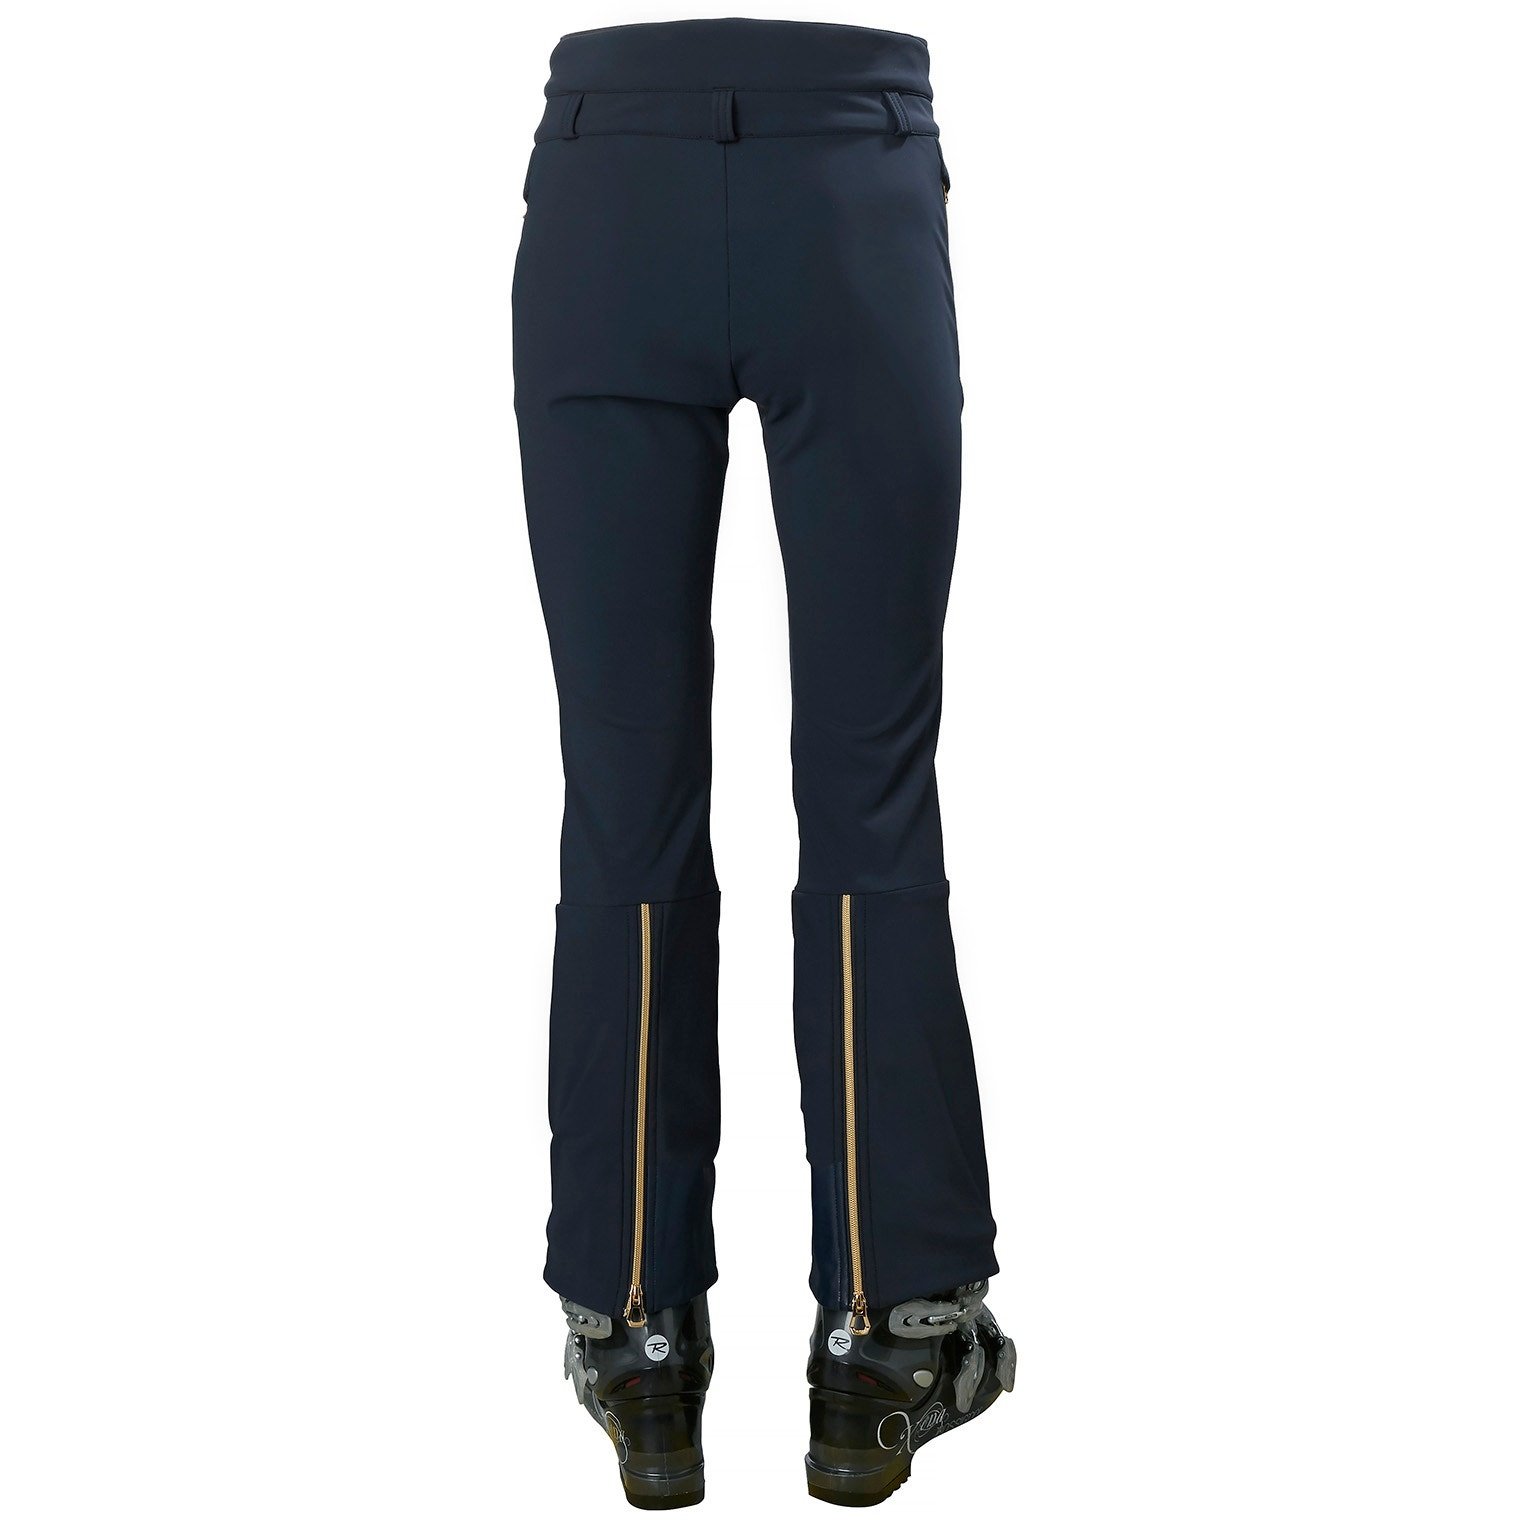  Helly-Hansen Womens Avanti Waterproof Stretch Pant, 597 Navy,  X-Small : Clothing, Shoes & Jewelry